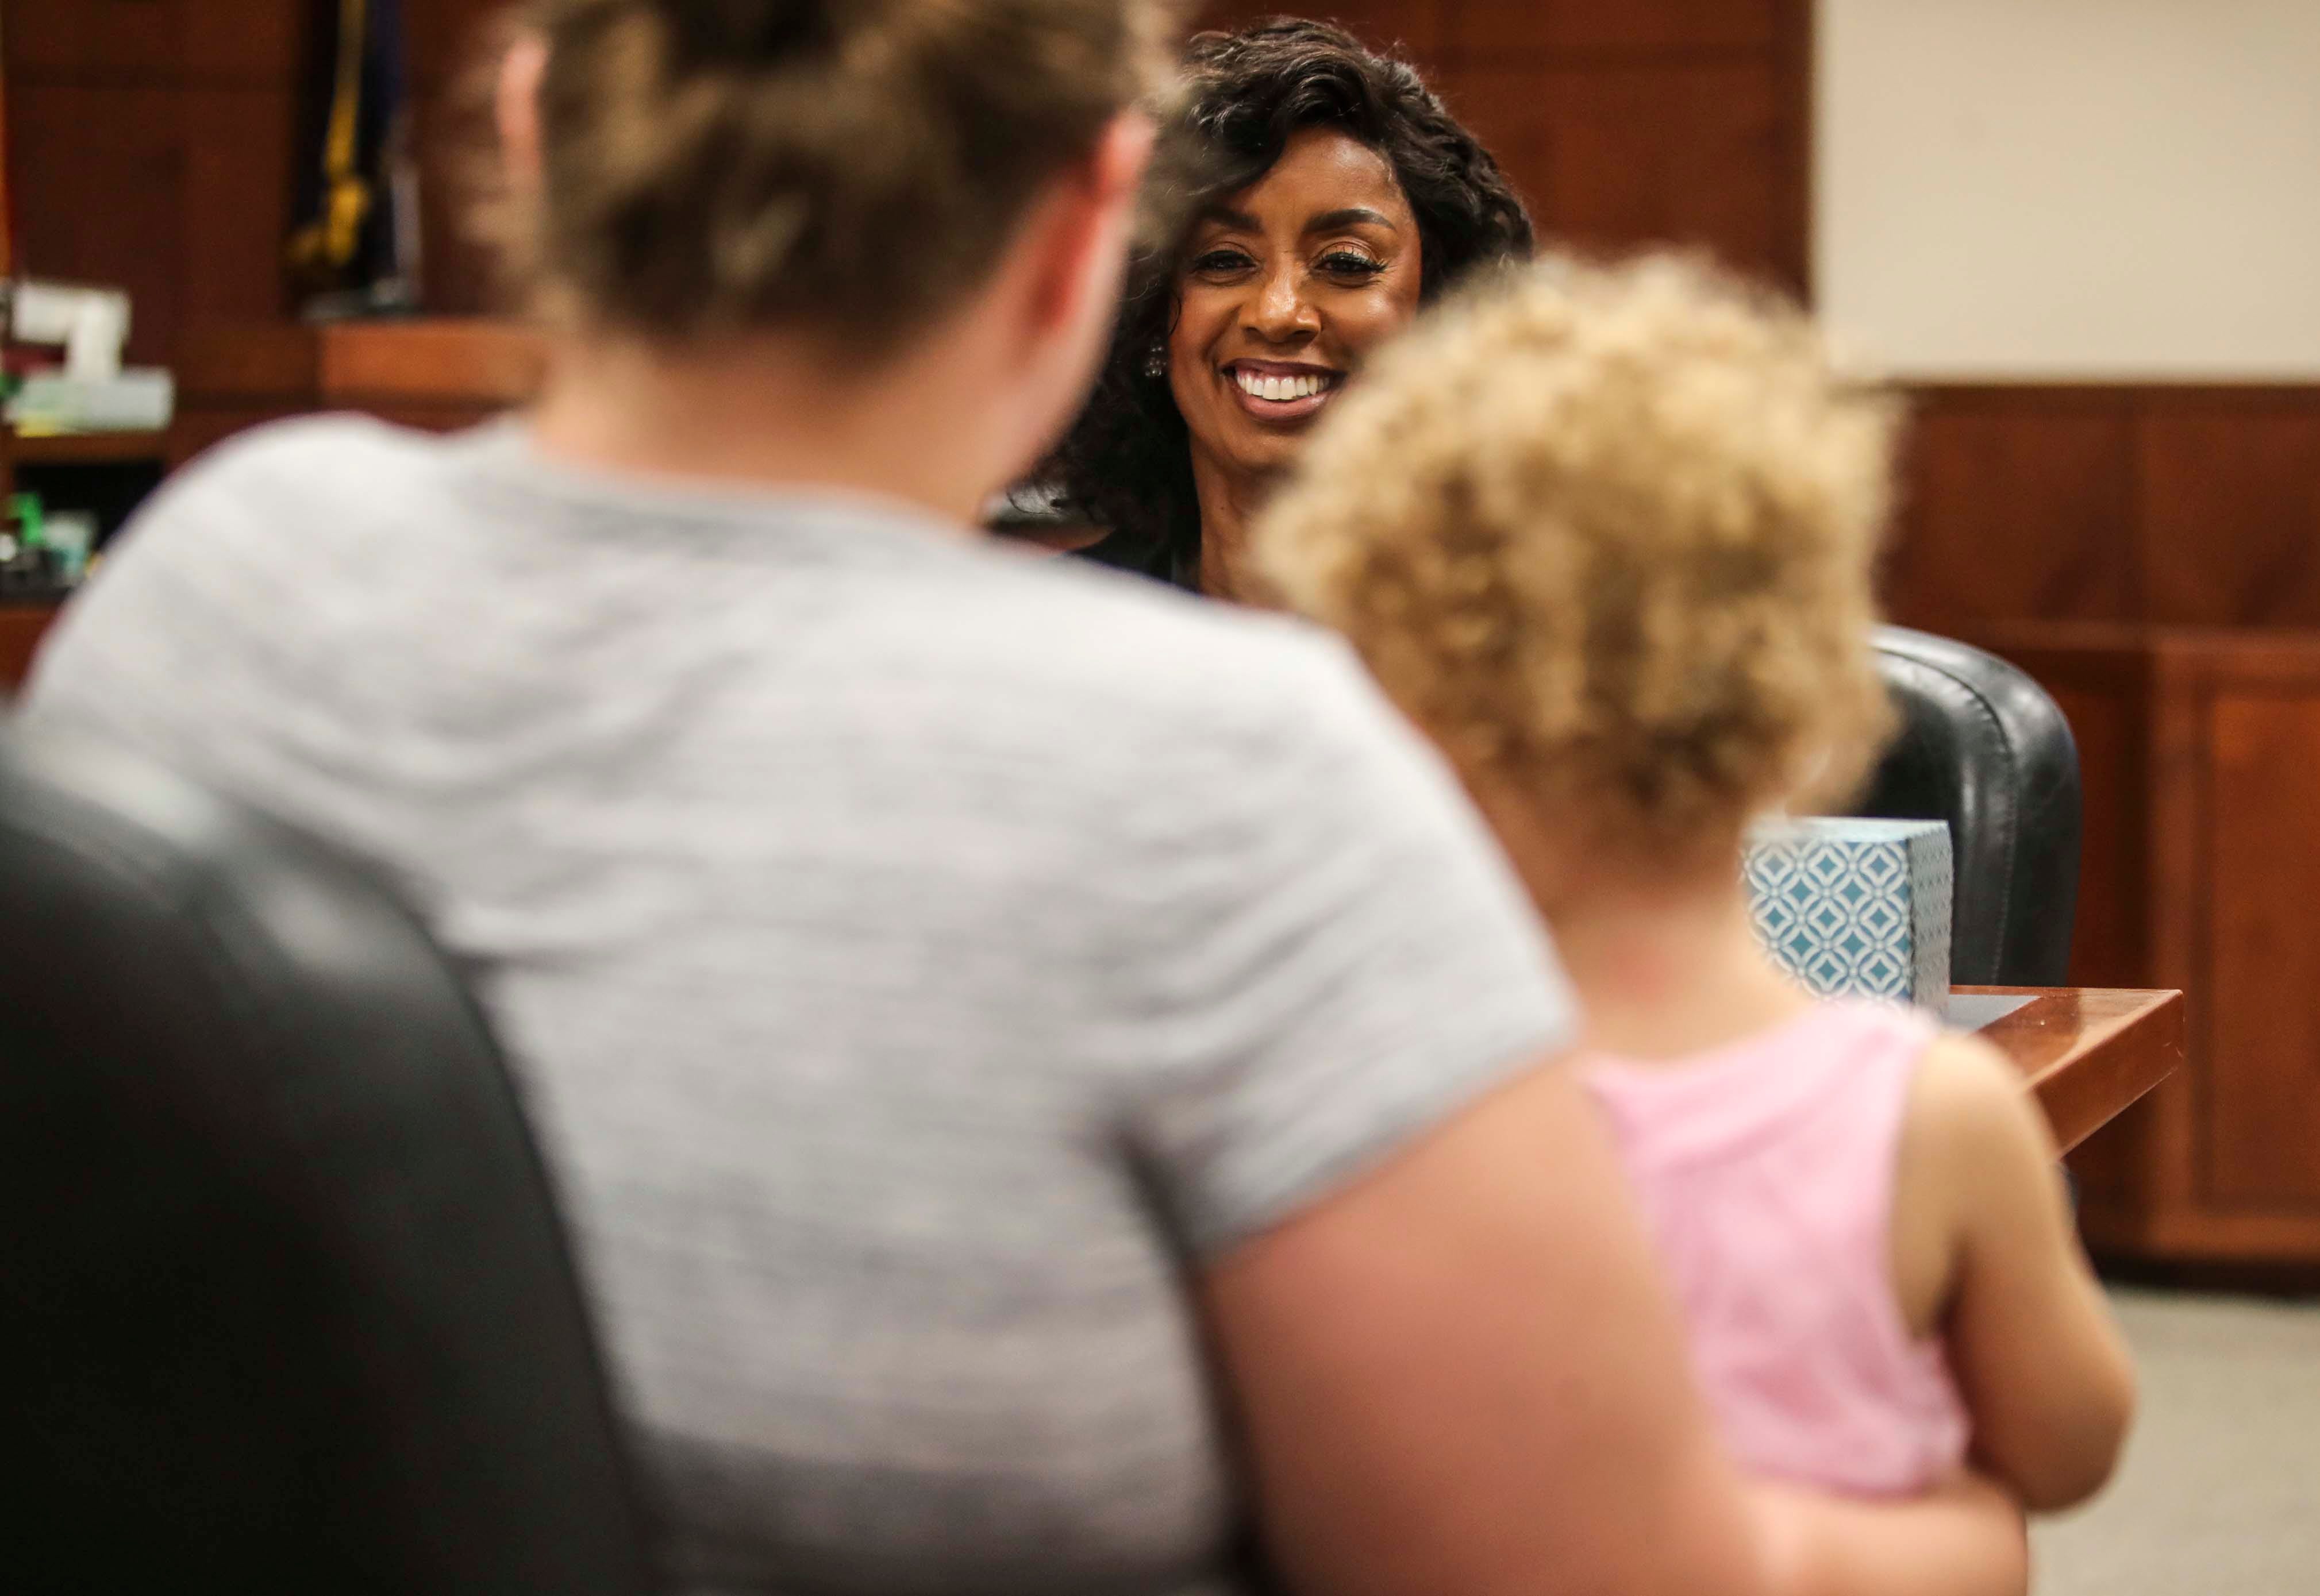 Judge Denise Brown oversees Jefferson County's family drug court, the only court of its kind in Kentucky. Brown smiles often at the men and women she sees as they try to change their lives around.